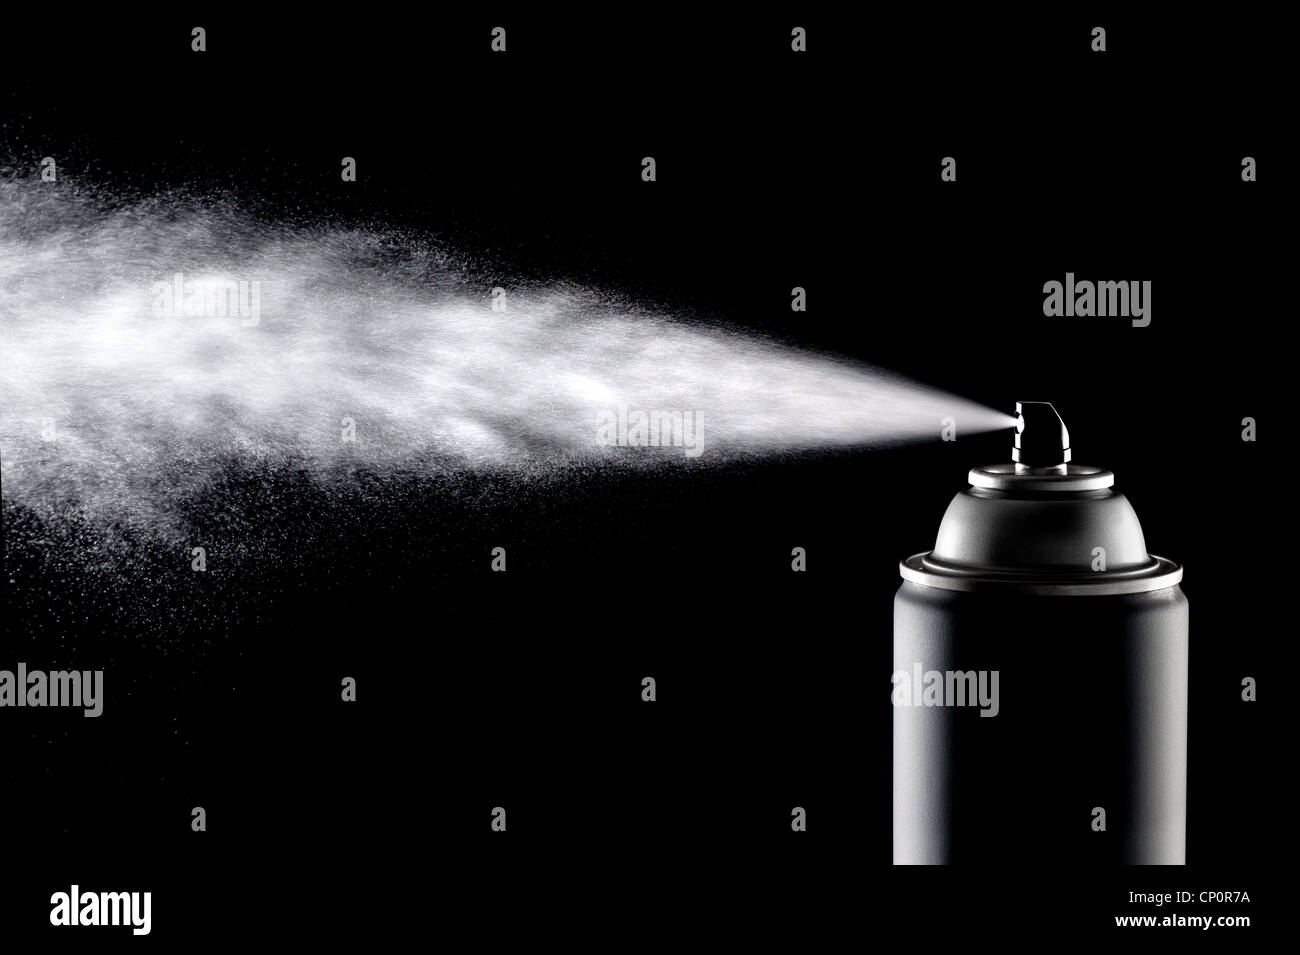 An aerosol can of spray dispensing its content against a backlit black background. Stock Photo